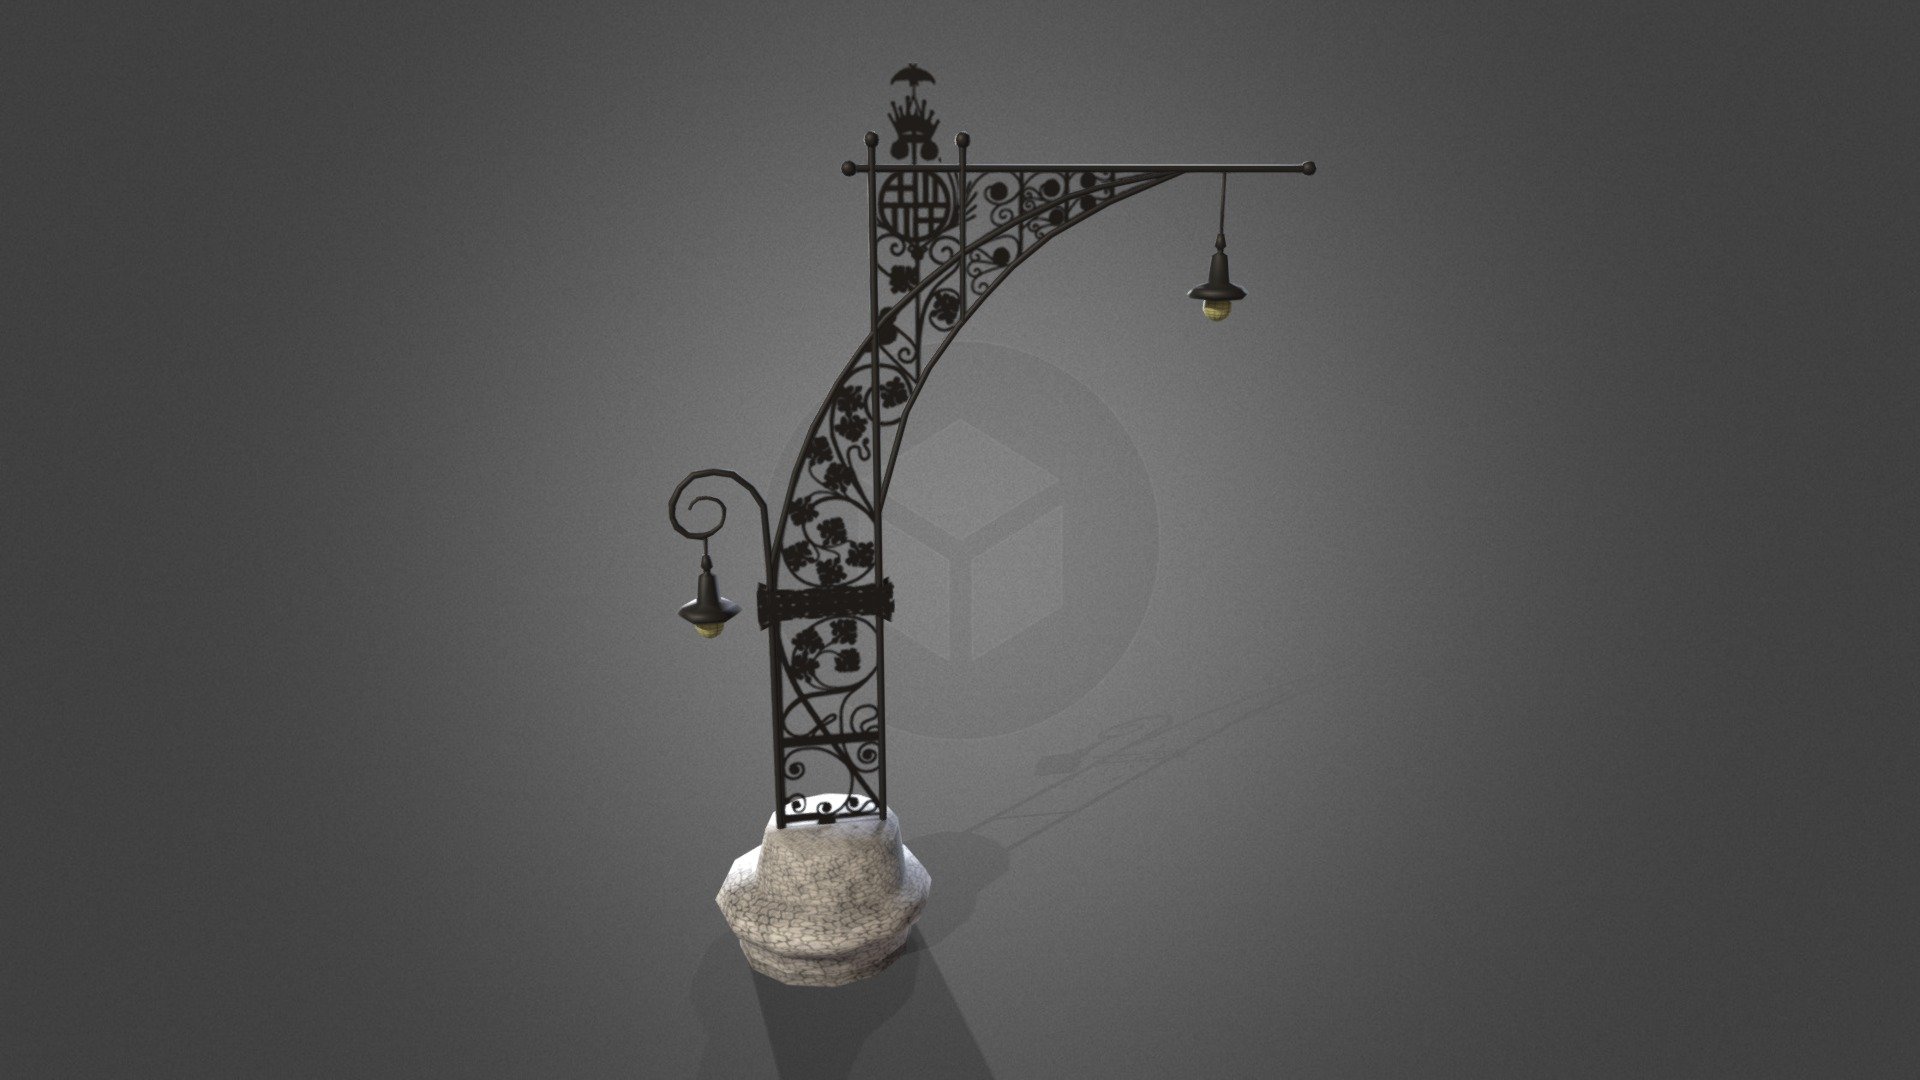 Lowpoly model of street lamps Paseo de Gracia in Barcelona designed by the architect Antoni Gaudí i Cornet.

With only 786 faces a perfect model for video game of the purest modernist style. Includes 2048px * 2048px textures in addition to .psd for customization - Streetlight Antoni Gaudí i Cornet - 3D model by Dimas_Alcalde (@dimasalcaldeperello) 3d model